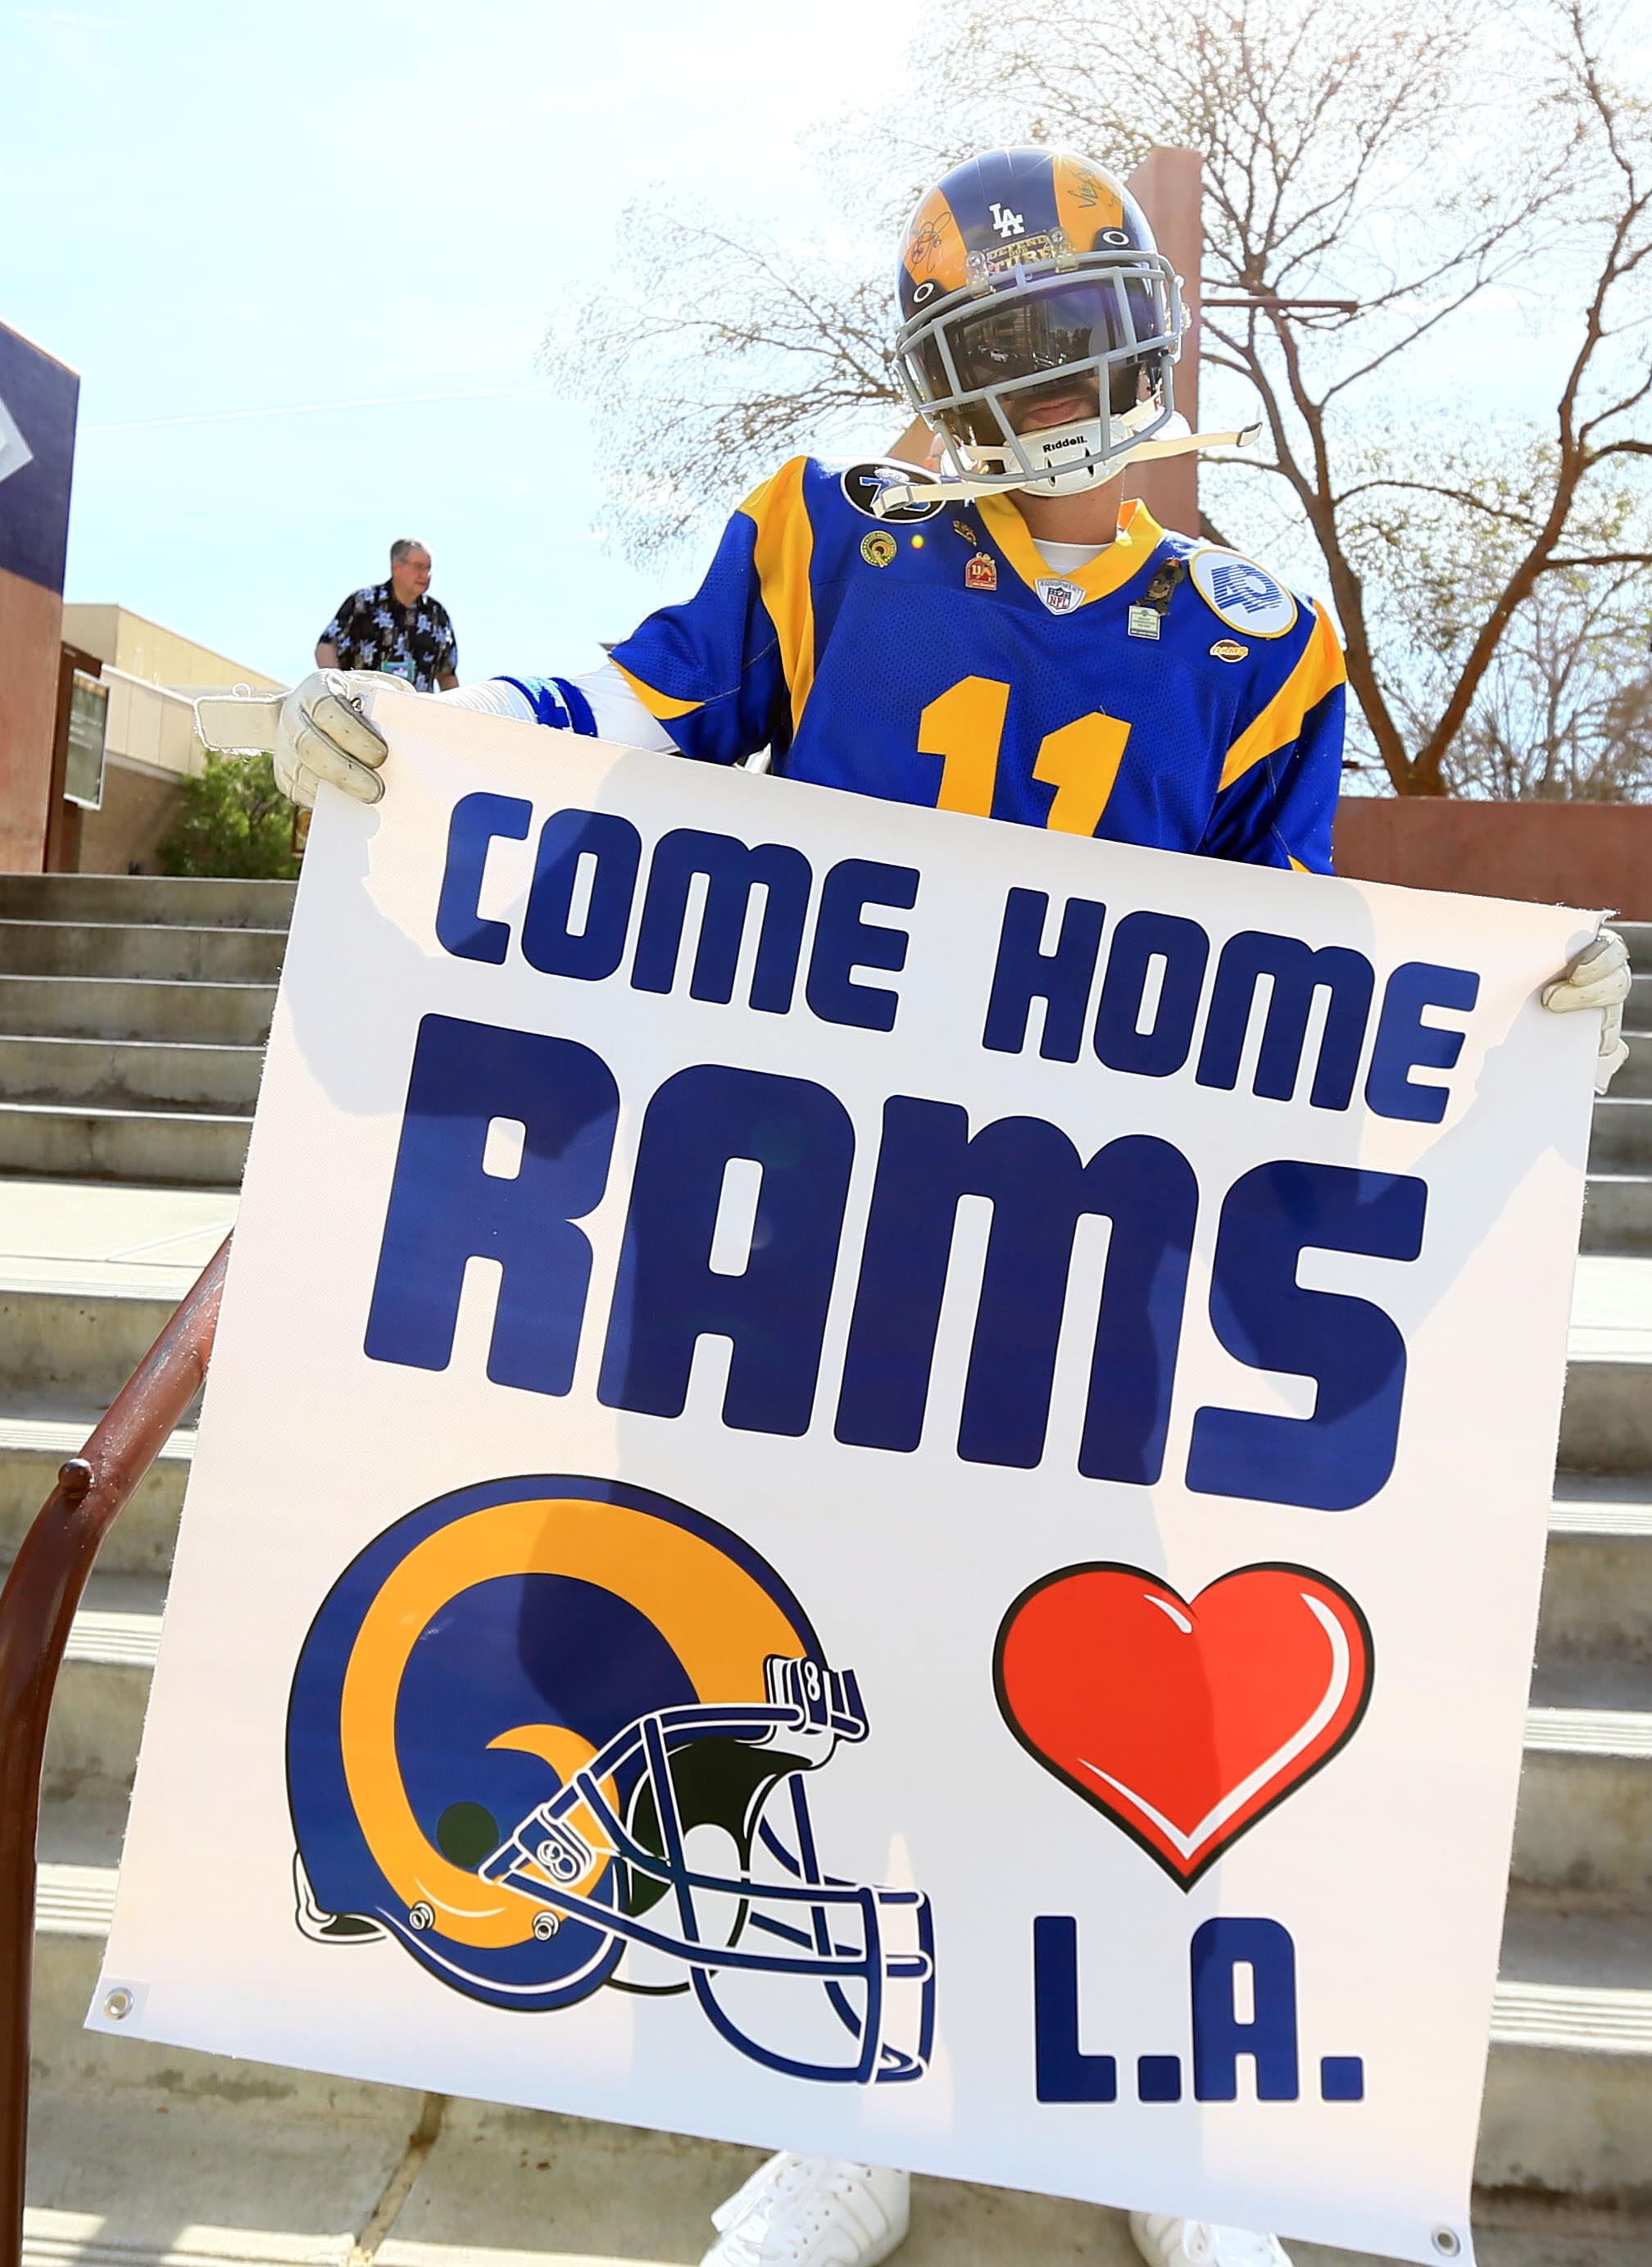 Rams To Move To Los Angeles, Chargers Could Join